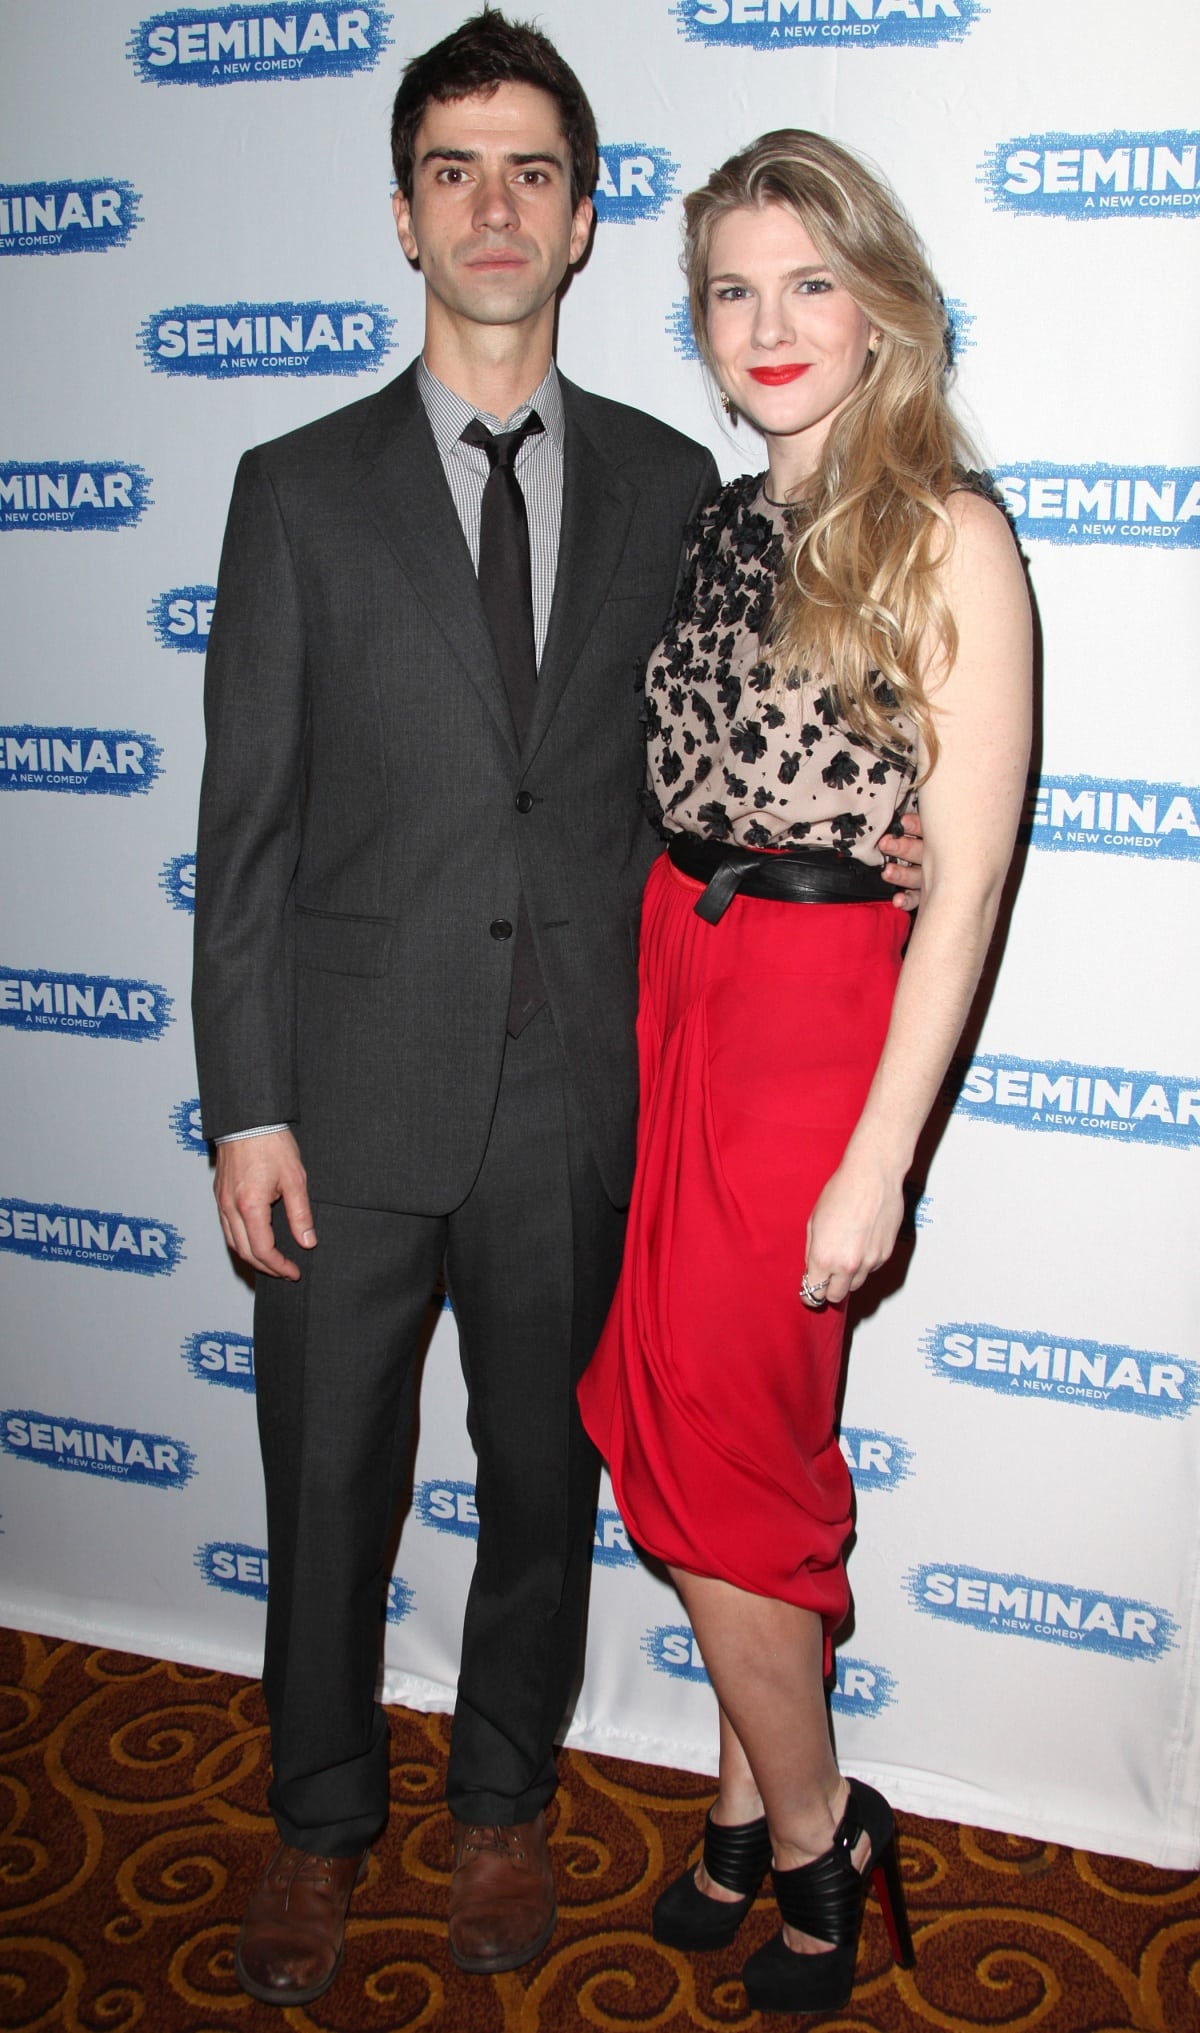 Hamish Linklater and Lily Rabe at the Seminar Opening Night After Party